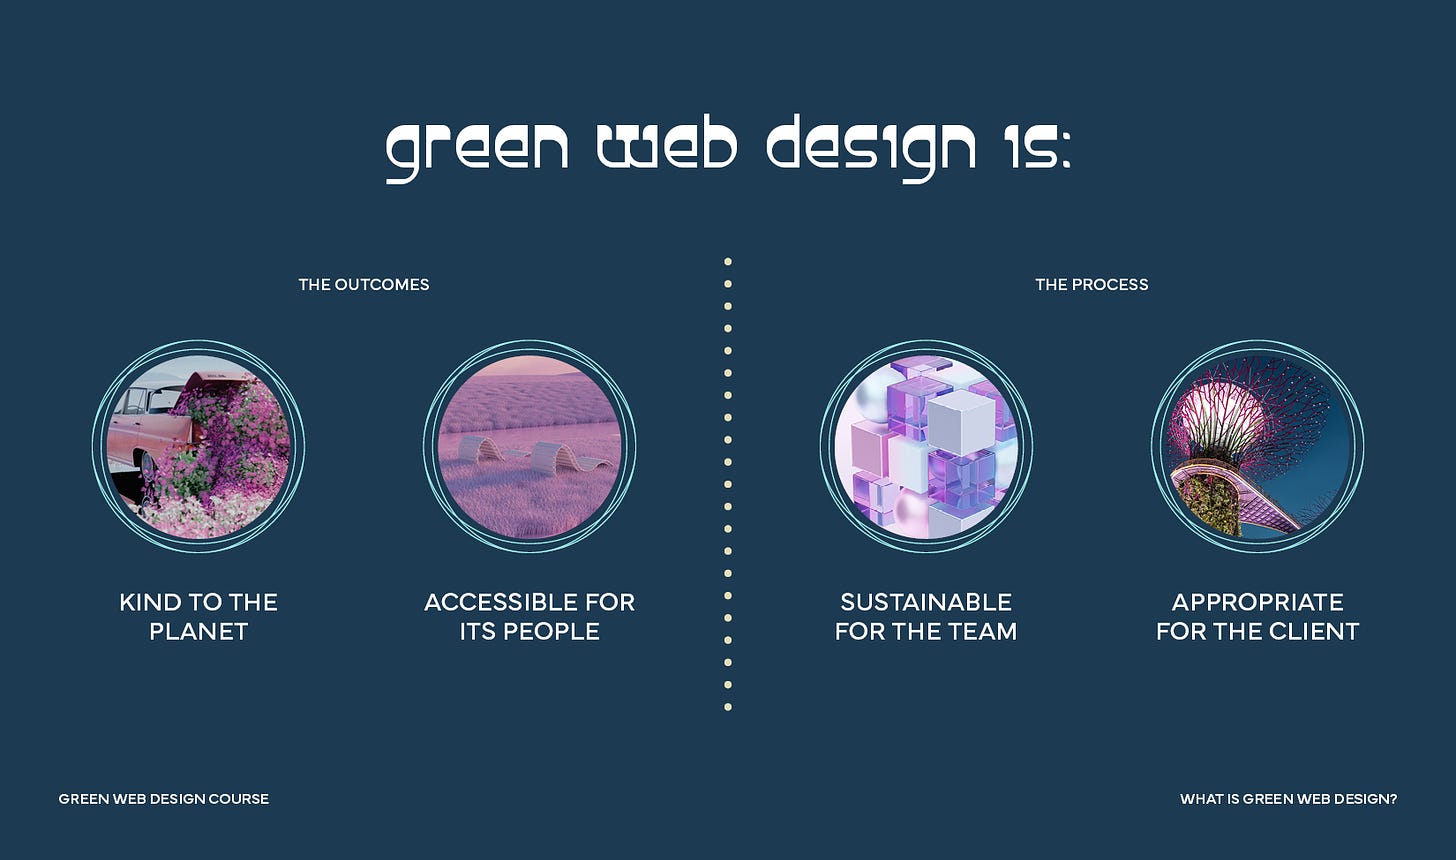 Green web design is kind to the planet, accessible for its people, sustainable for the team, and appropriate for the client